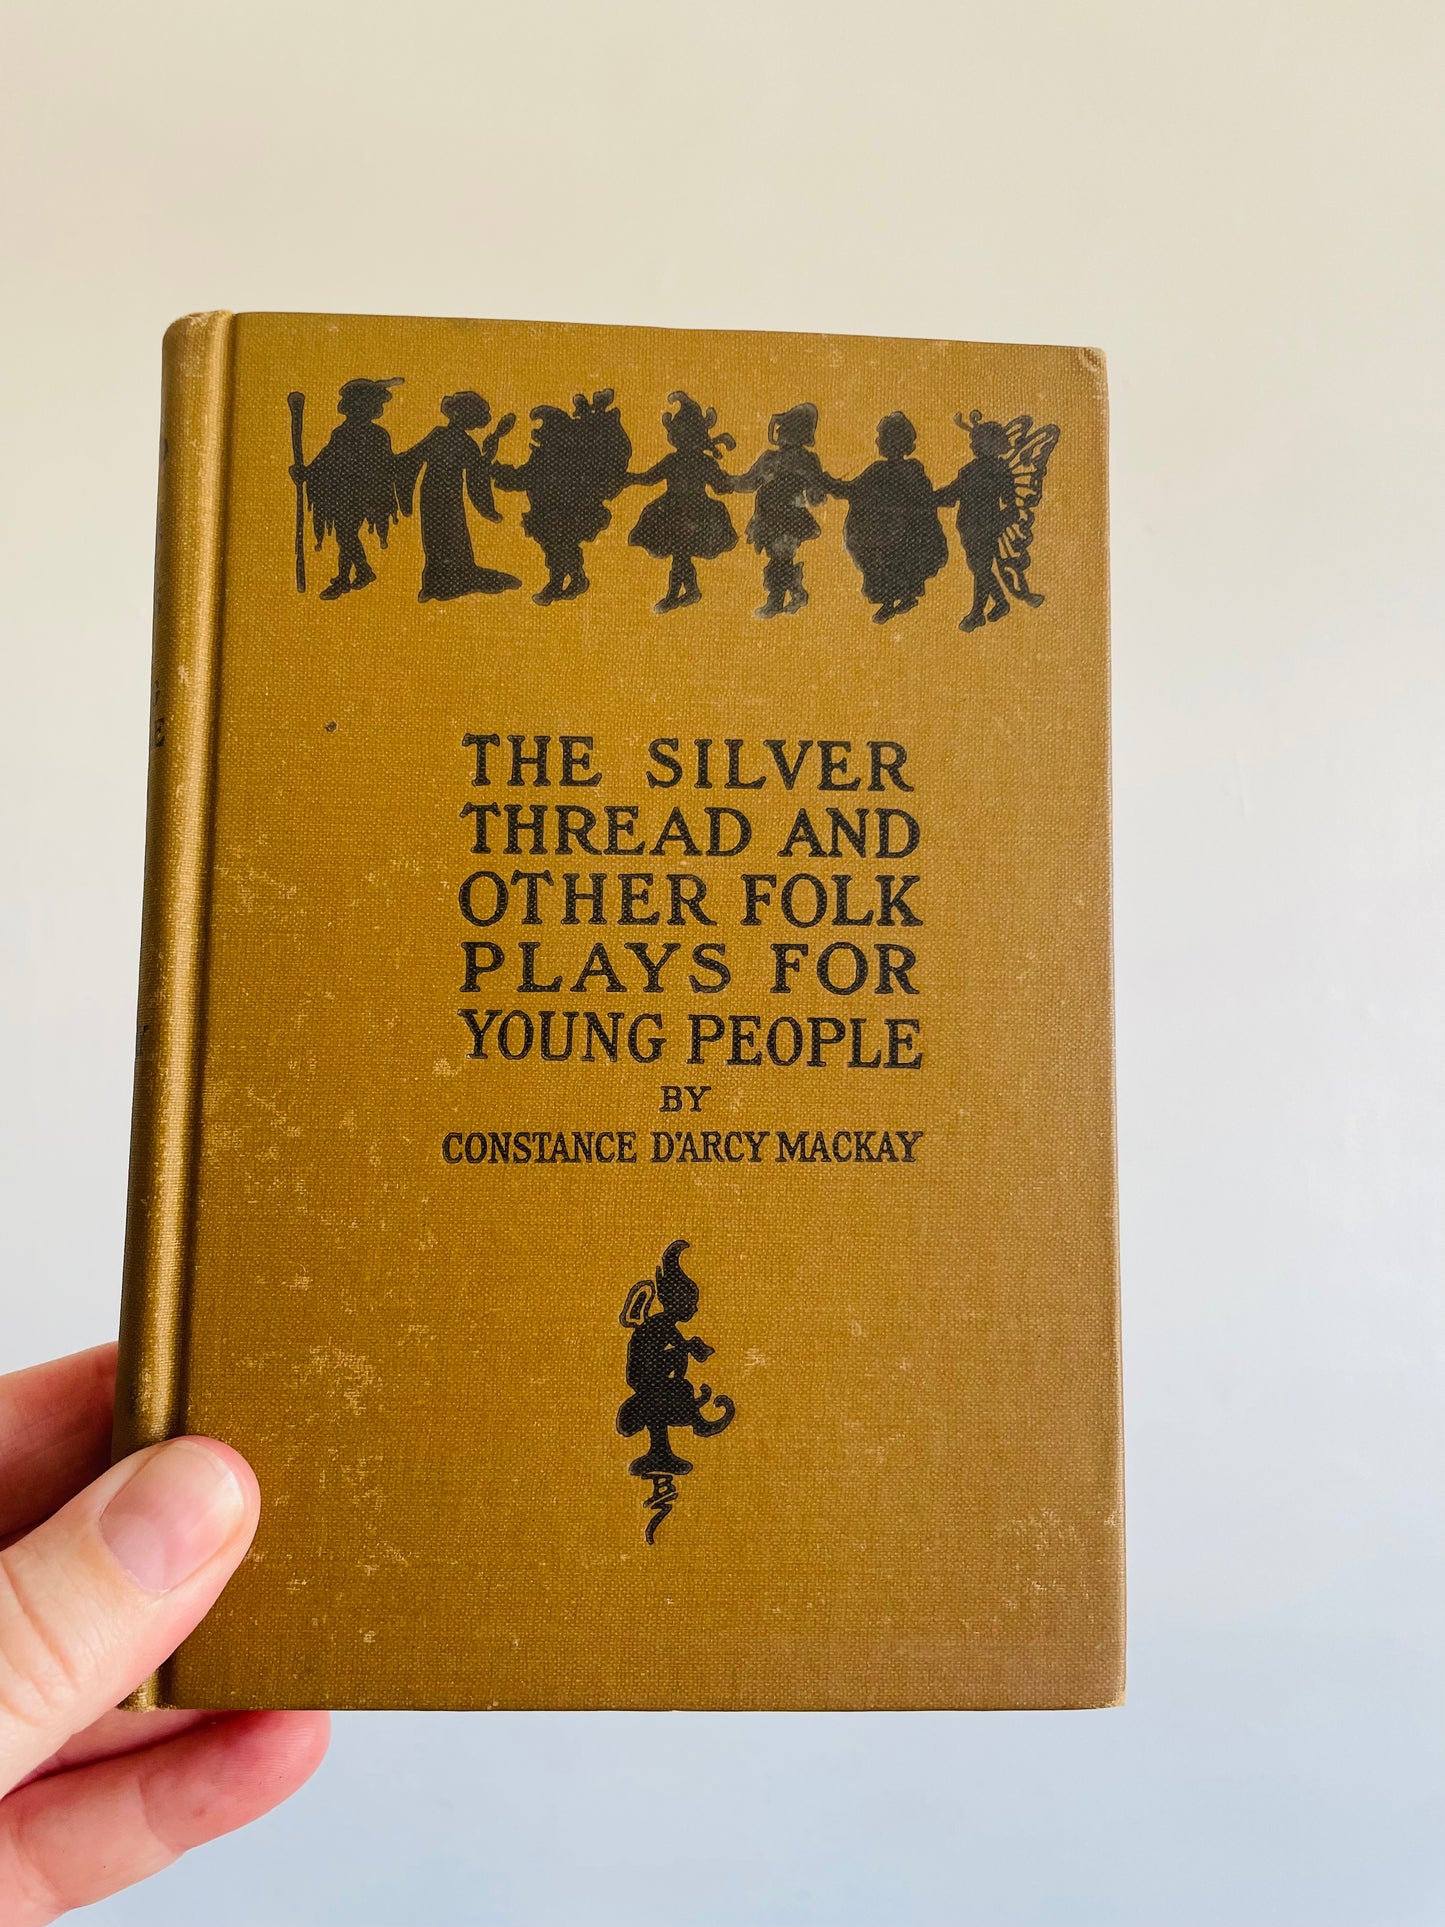 *RARE* The Silver Thread & Other Folk Plays for Young People - Constance D'Arcy Mackay - Hardcover Book (1938)